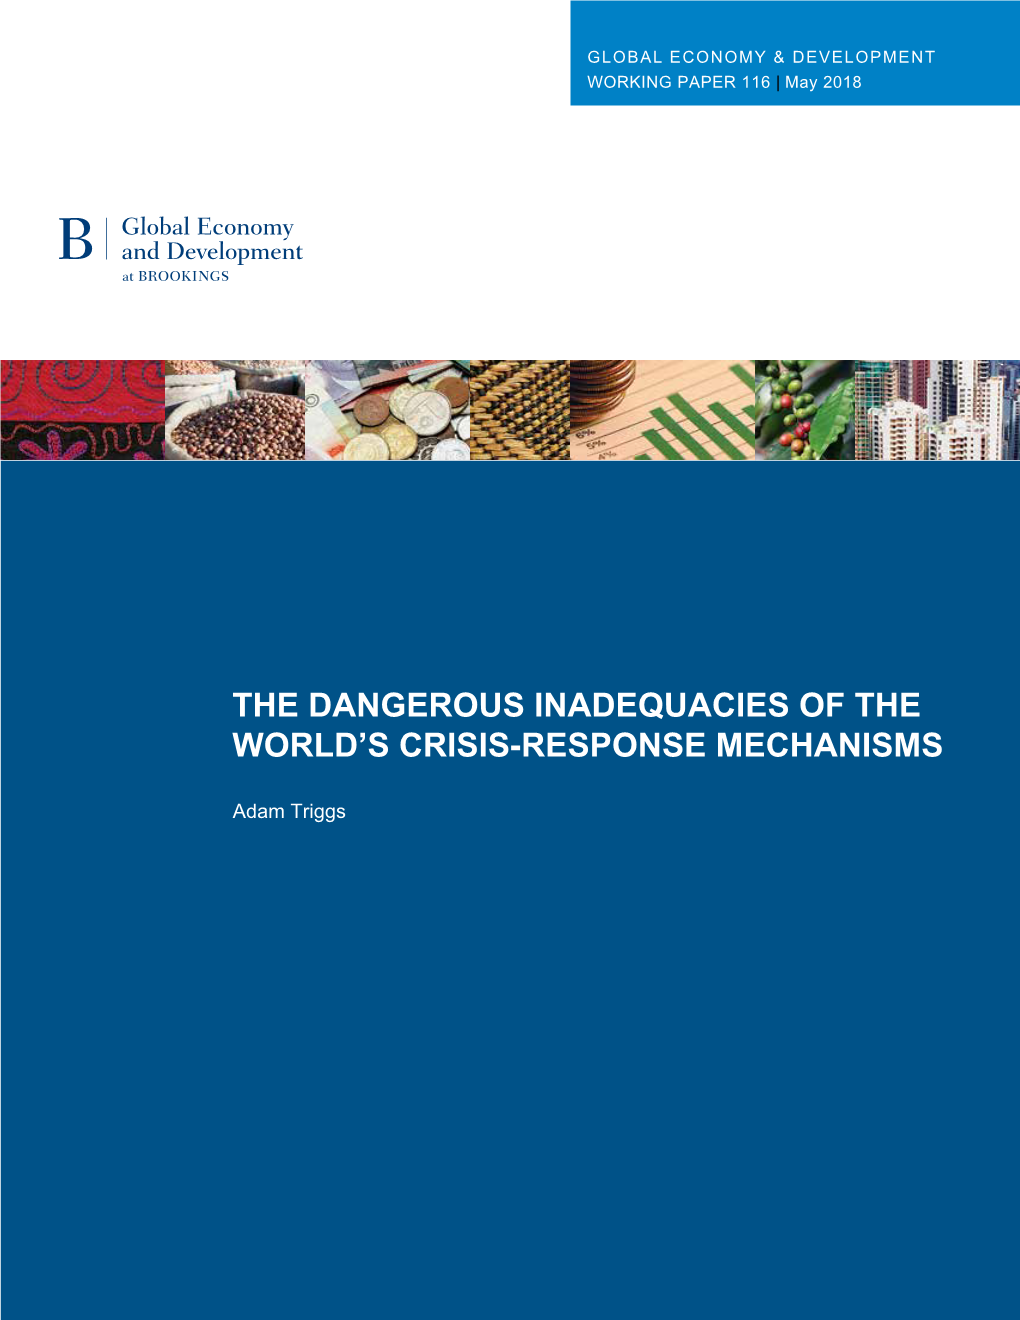 The Dangerous Inadequacies of the World's Crisis